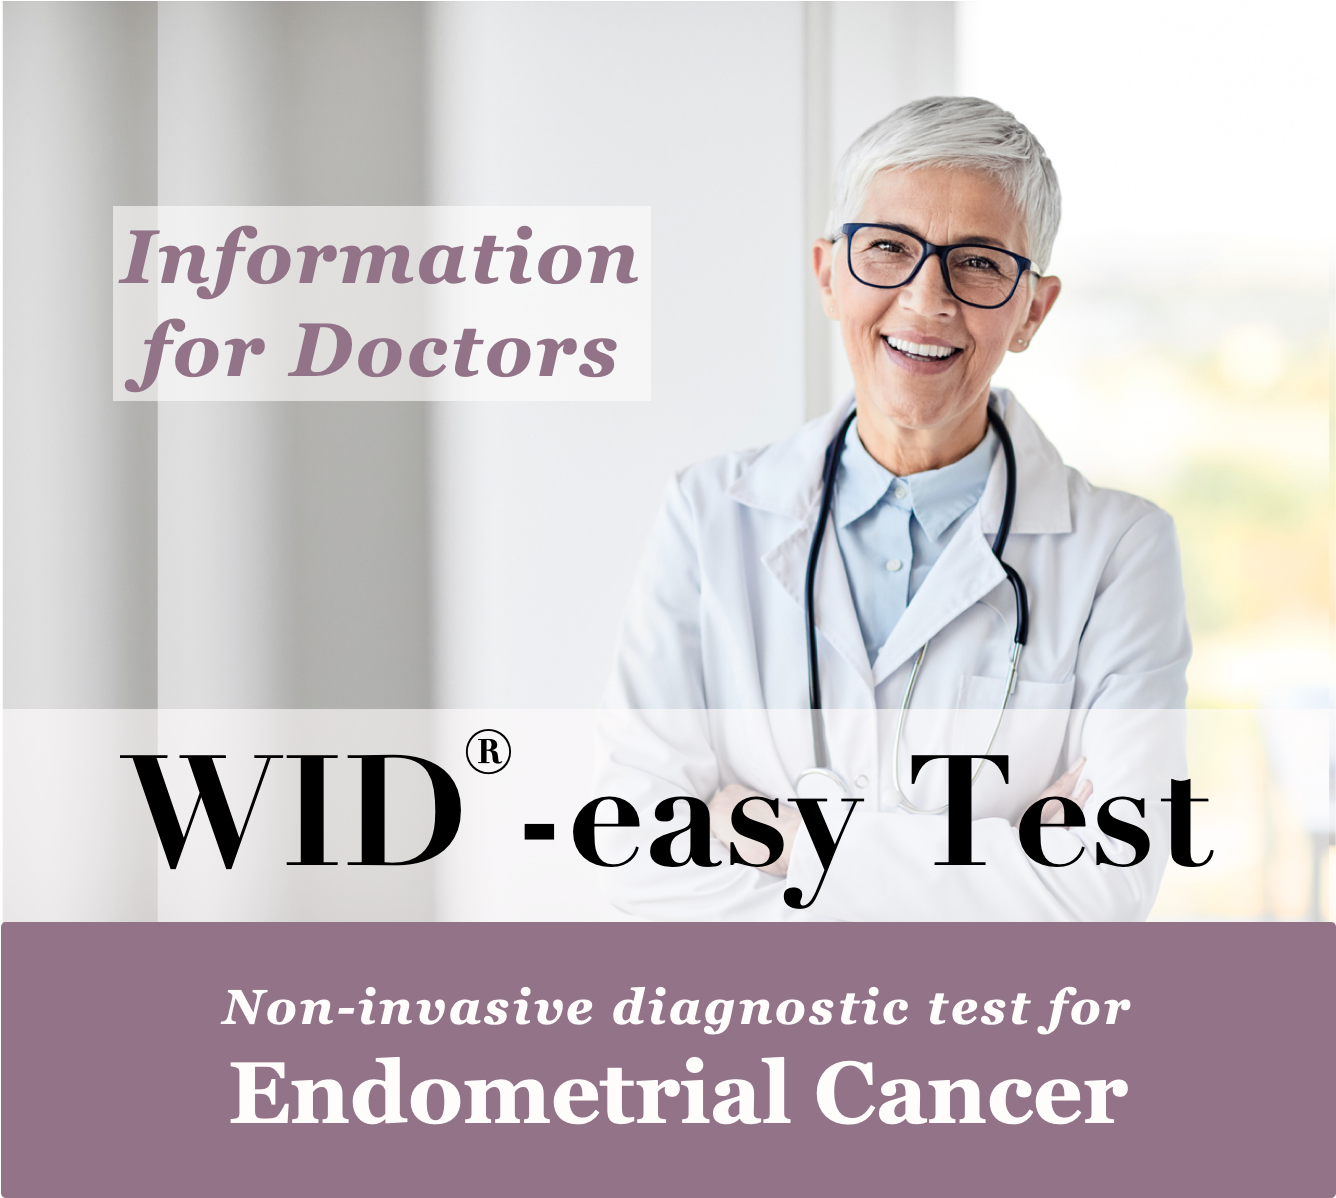 Doctor consulting about the WID® easy Test